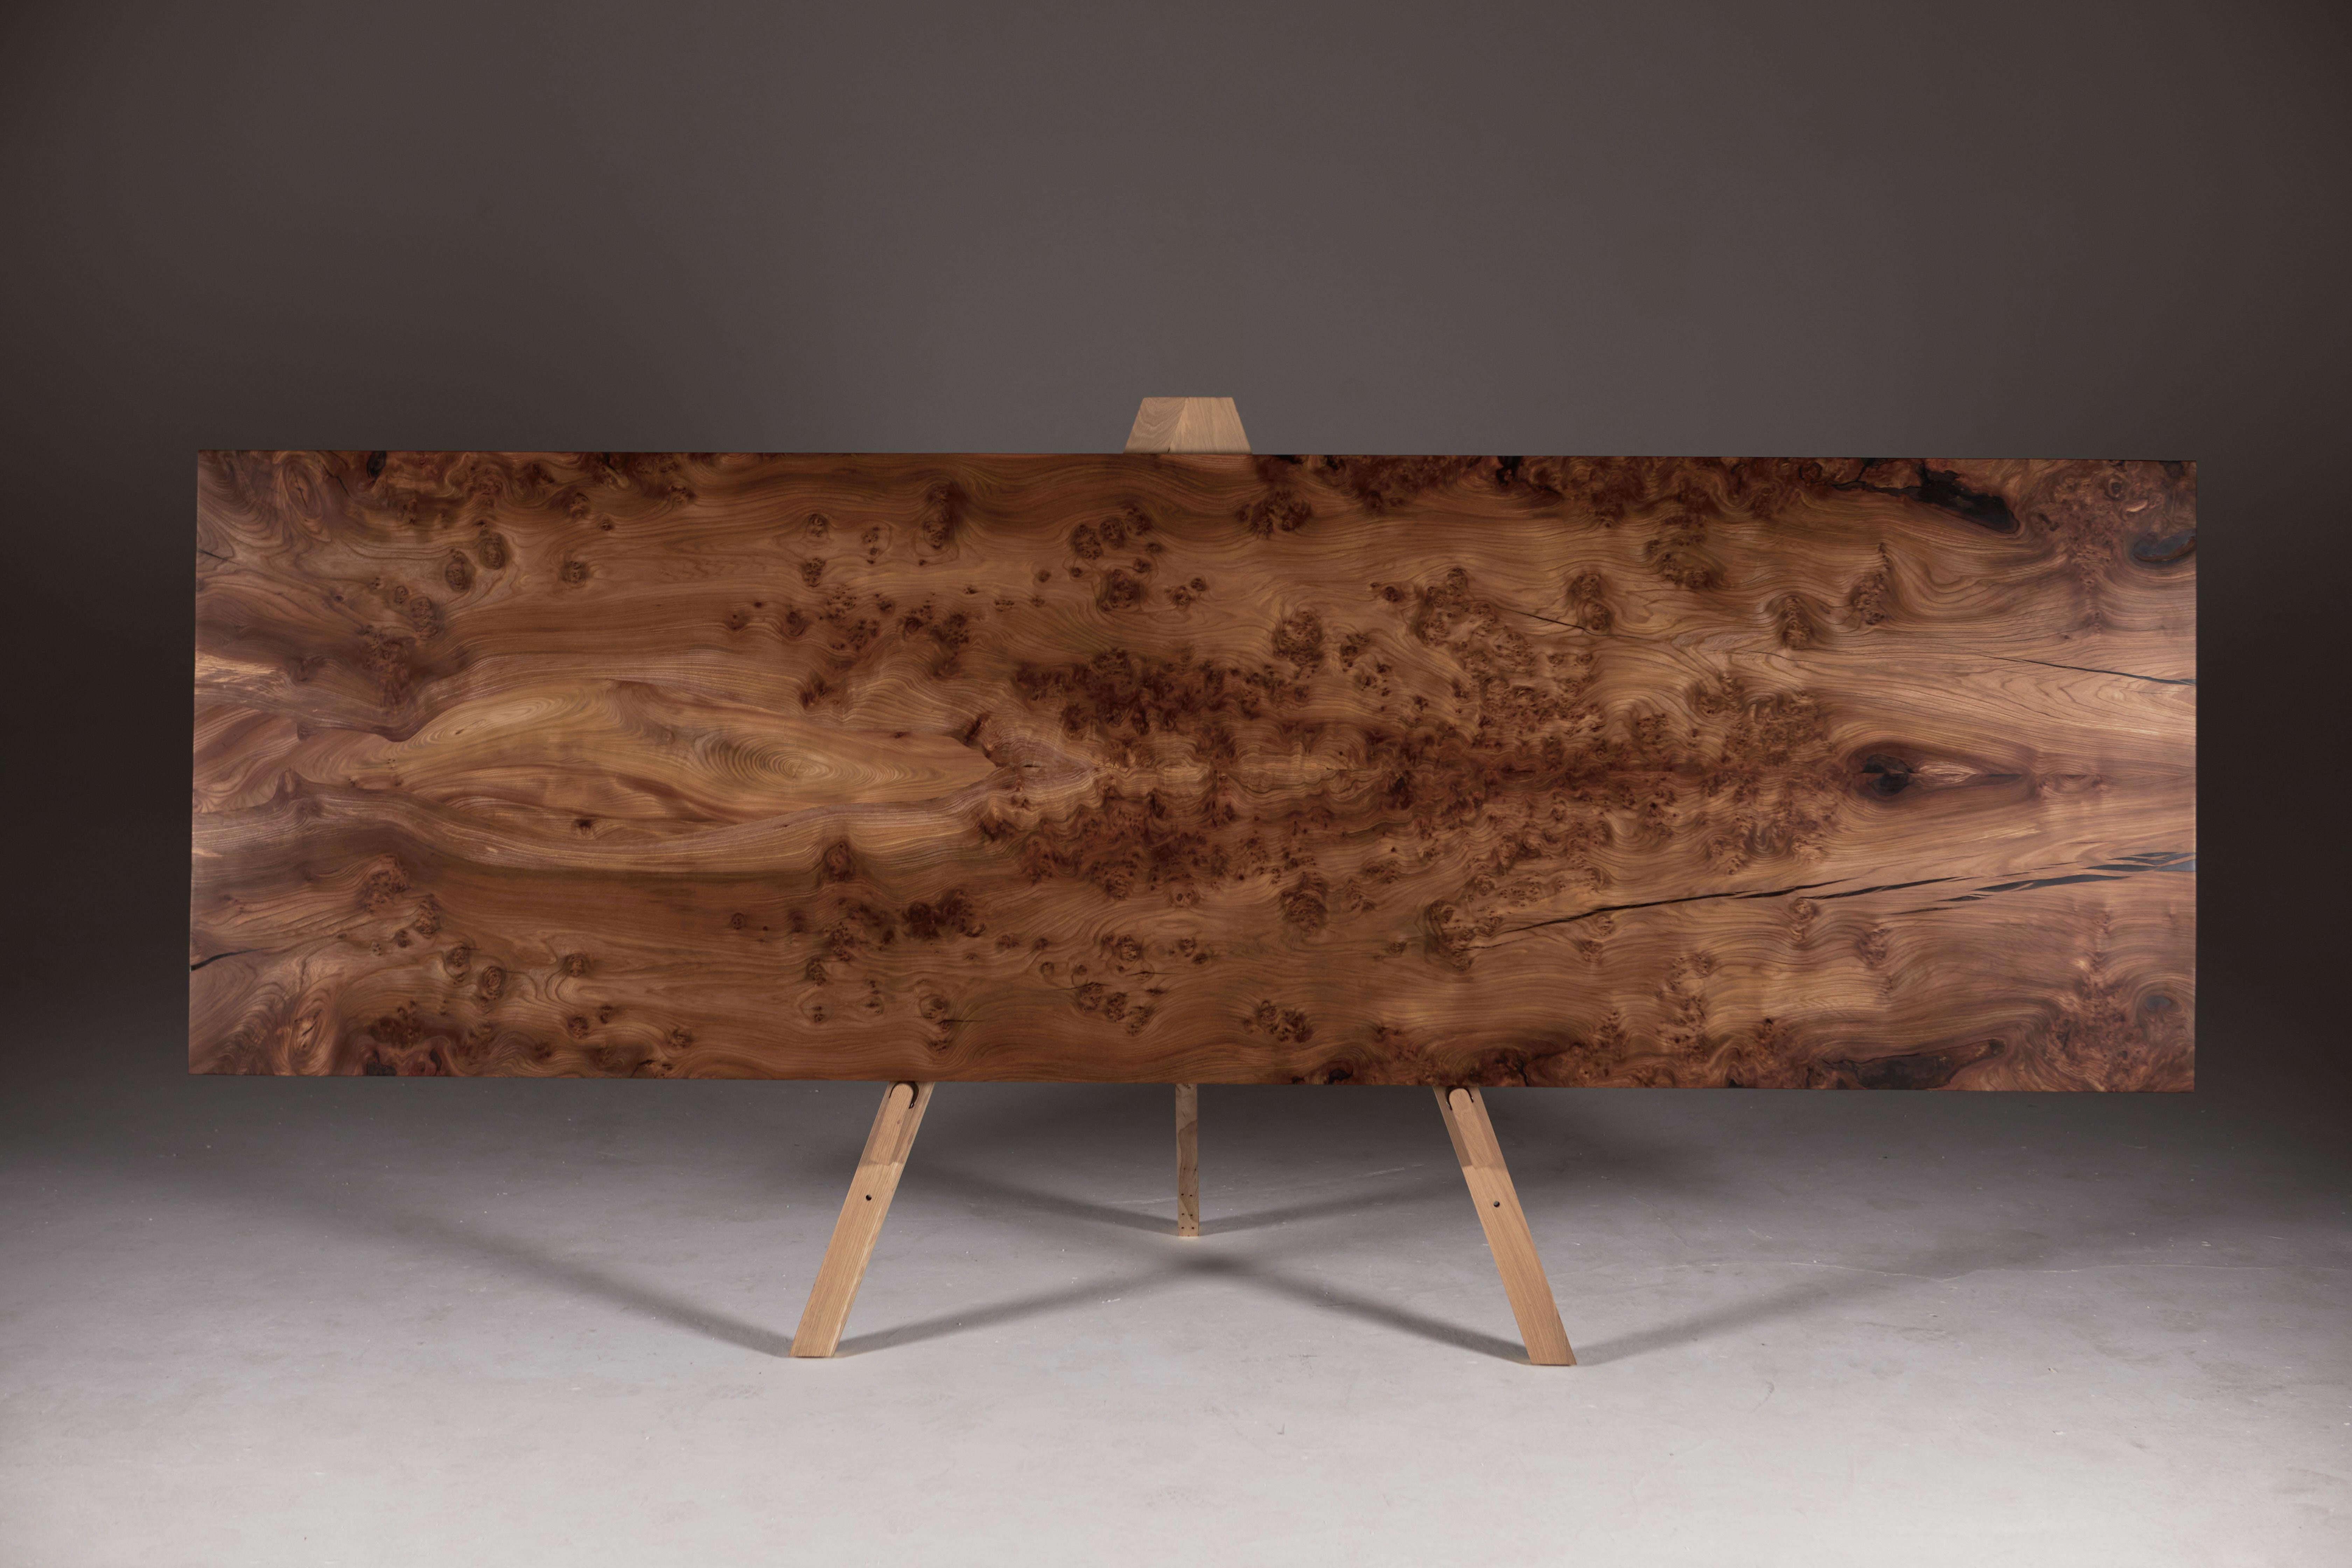 English Scottish Burr Elm Table with Inverted Live Edge Legs and Book-matched Top. 